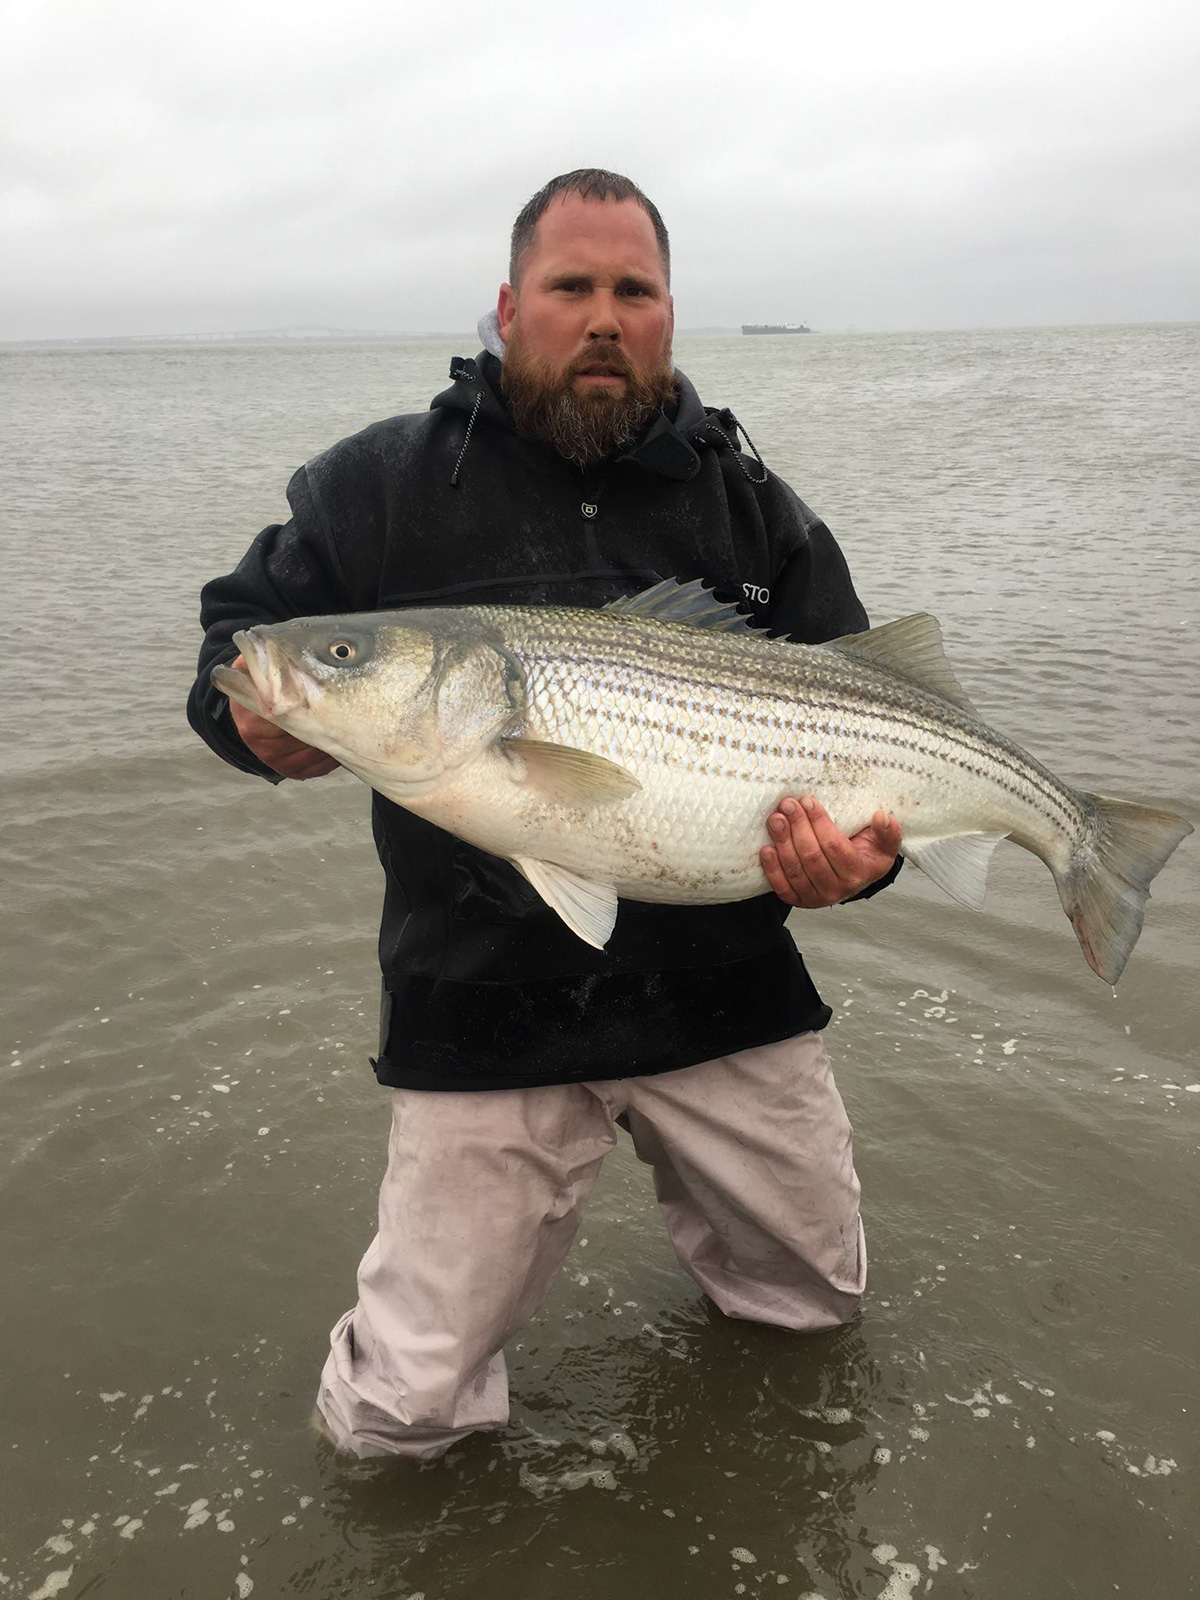 How To Catch Striped Bass In Rivers (Best Lures, Spots, Seasons & More)